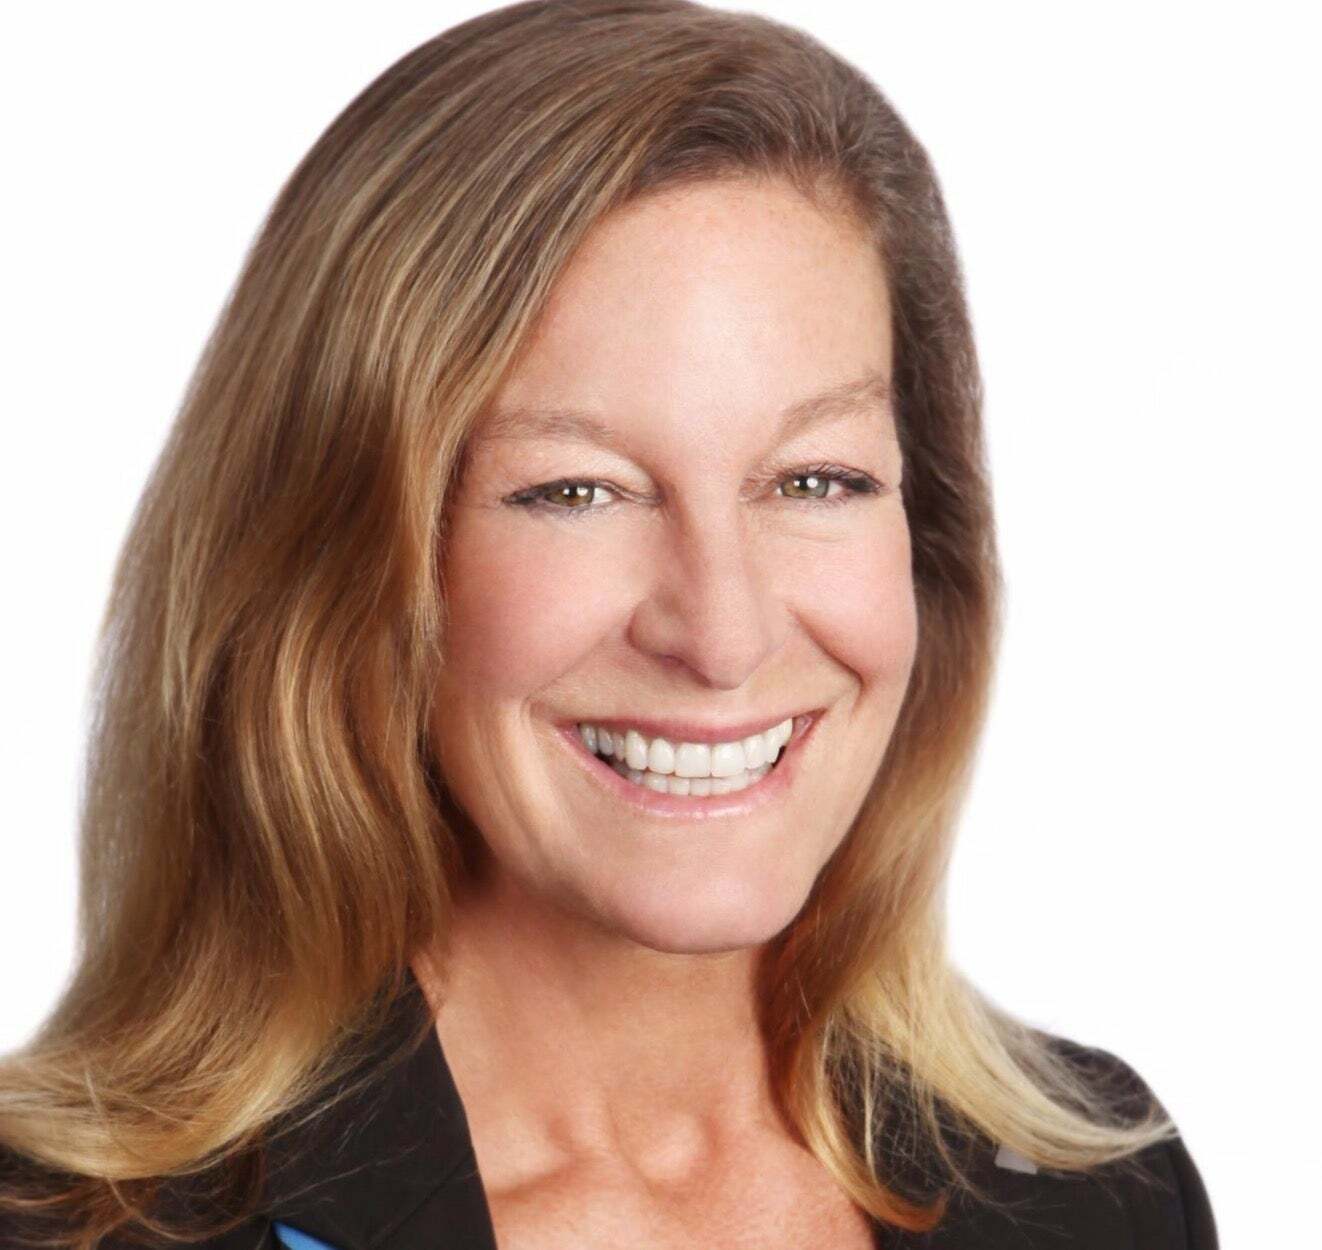 Patricia Humphreys, Real Estate Salesperson in Berkeley, Reliance Partners